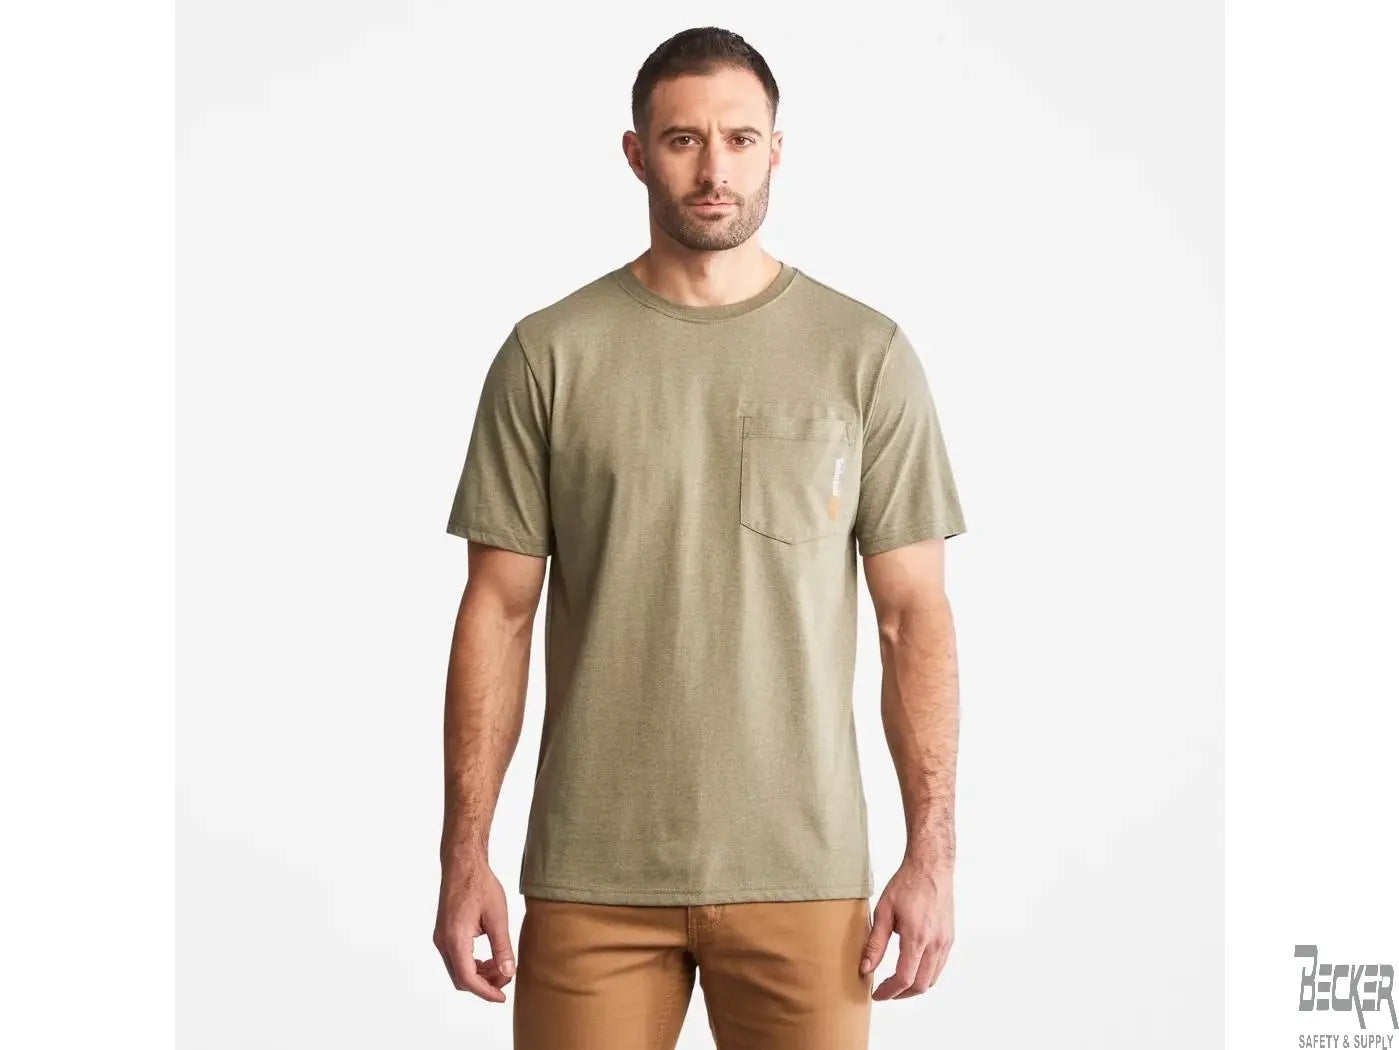 TIMBERLAND PRO - Base Plate Short Sleeve T-Shirt, Burnt Olive - Becker Safety and Supply